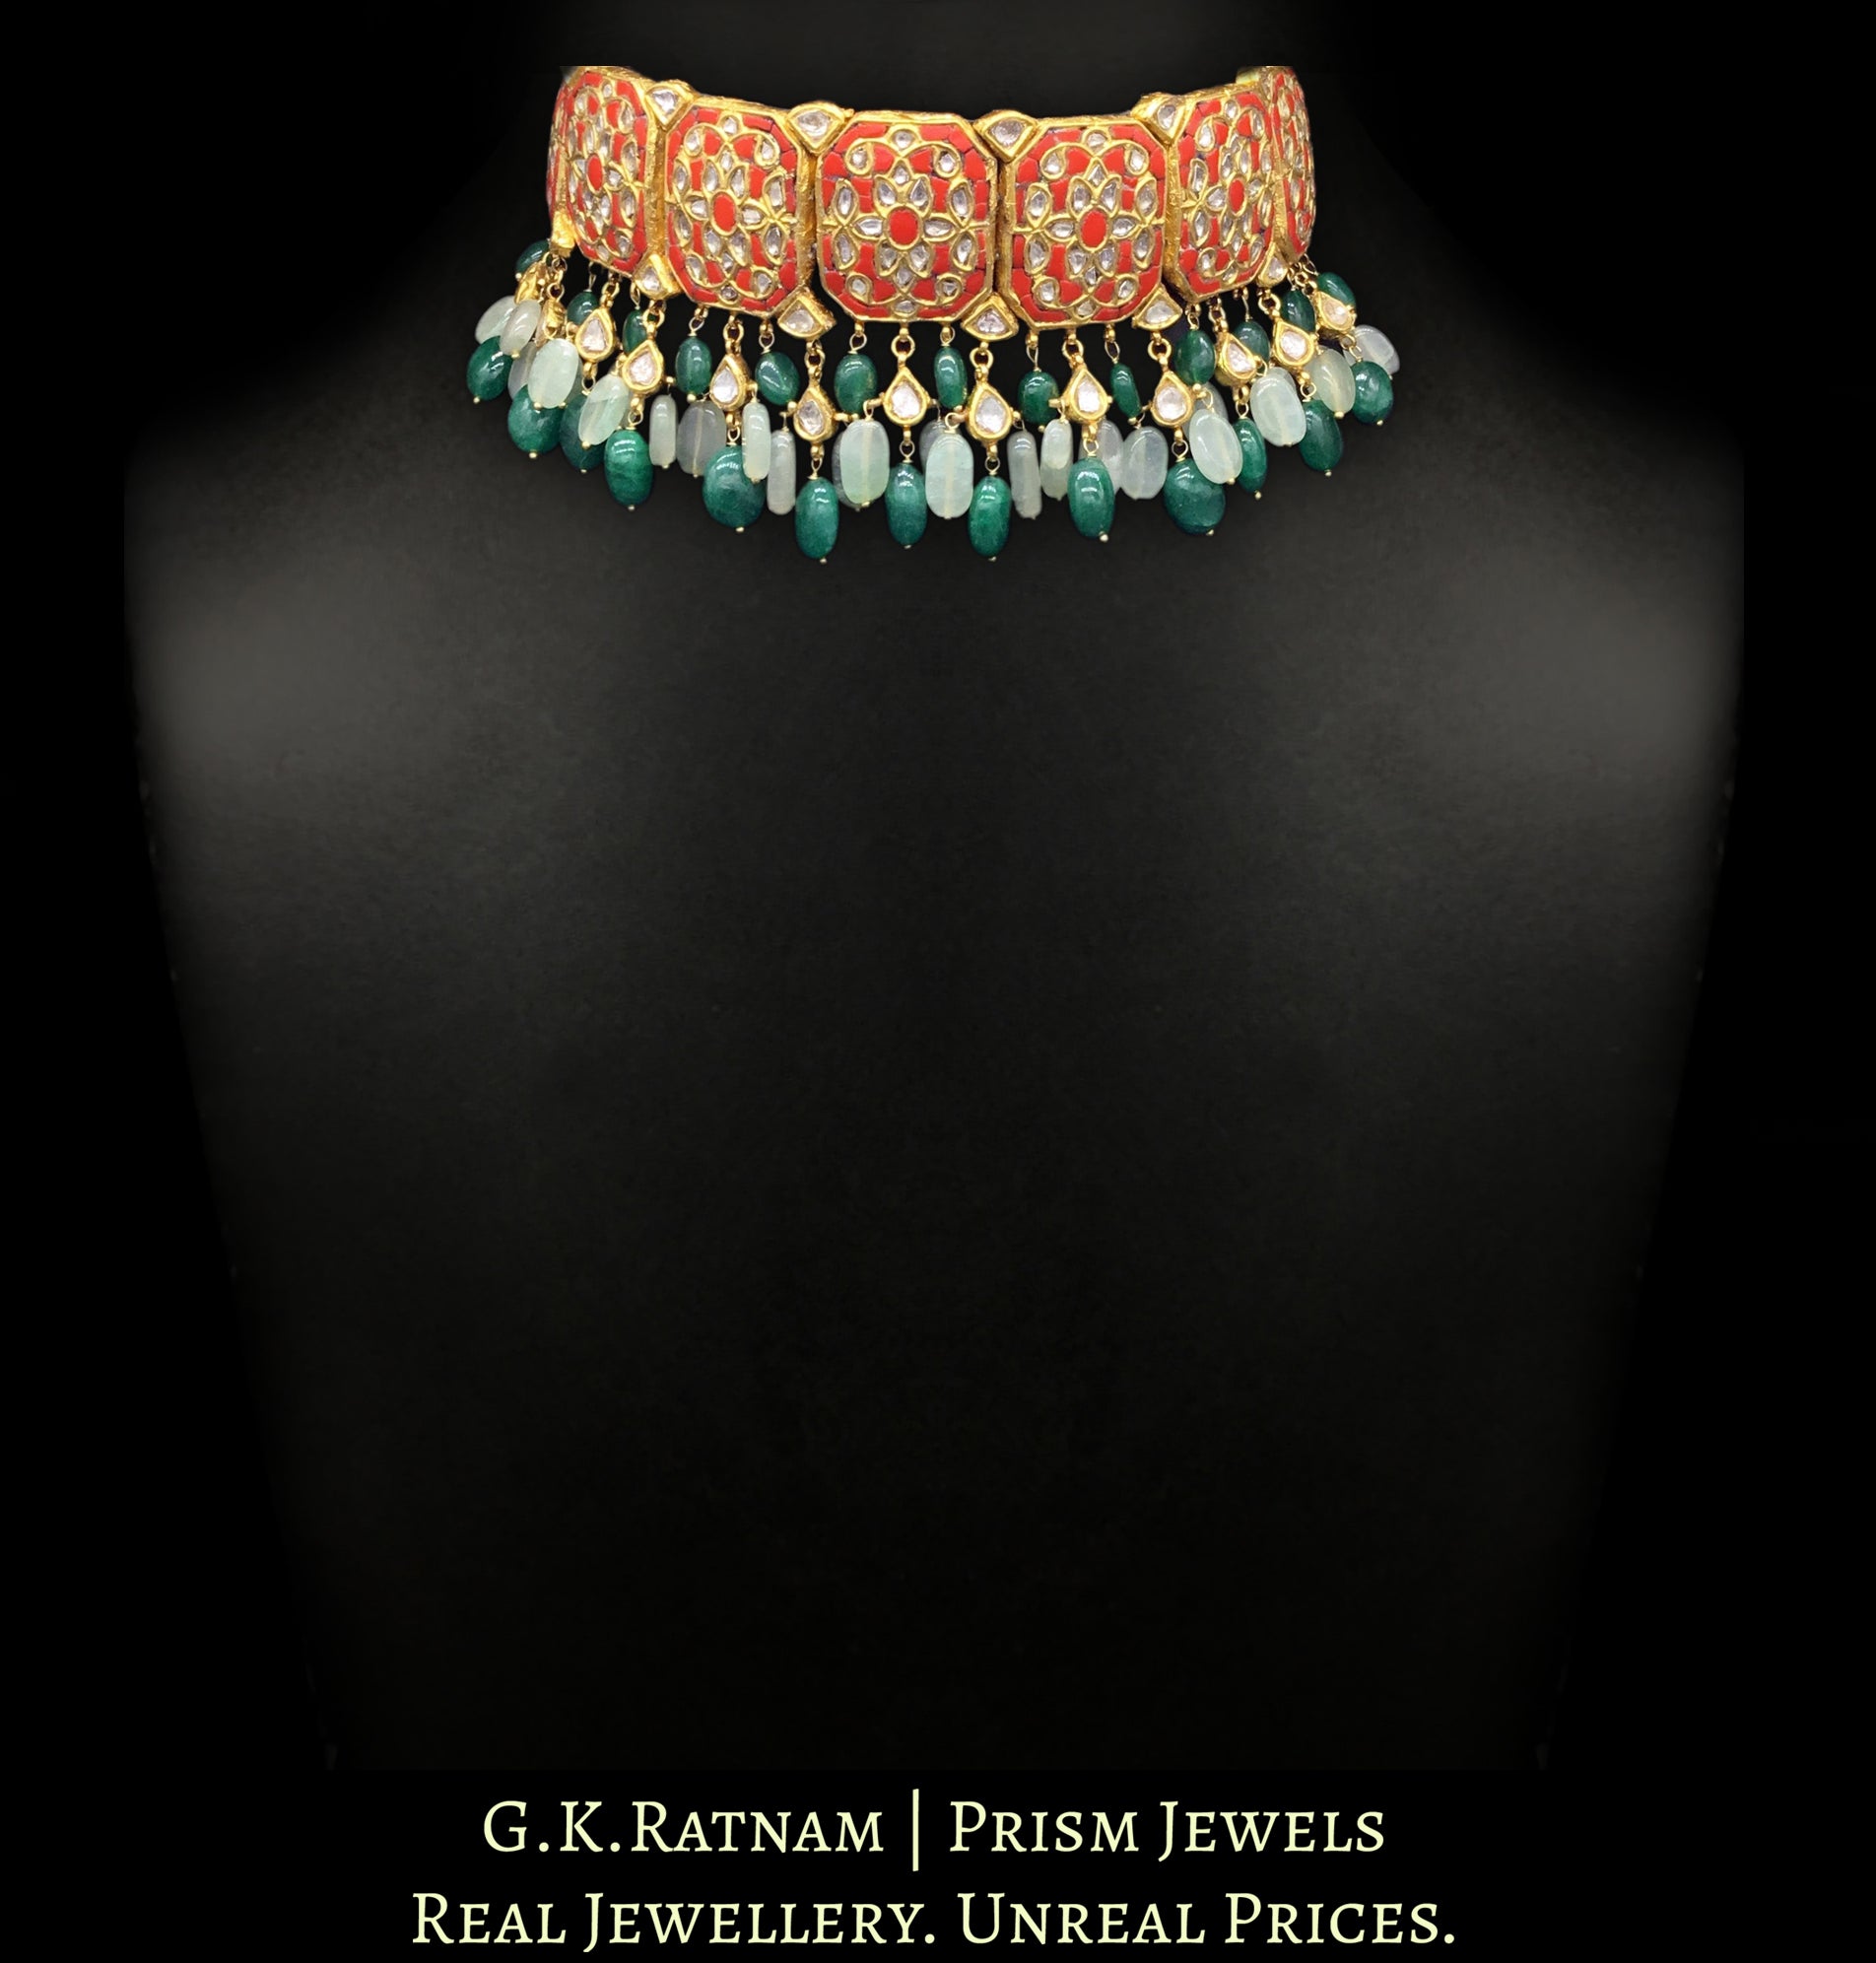 23k Gold and Diamond Polki Choker Necklace with vibrant corals (moonga)